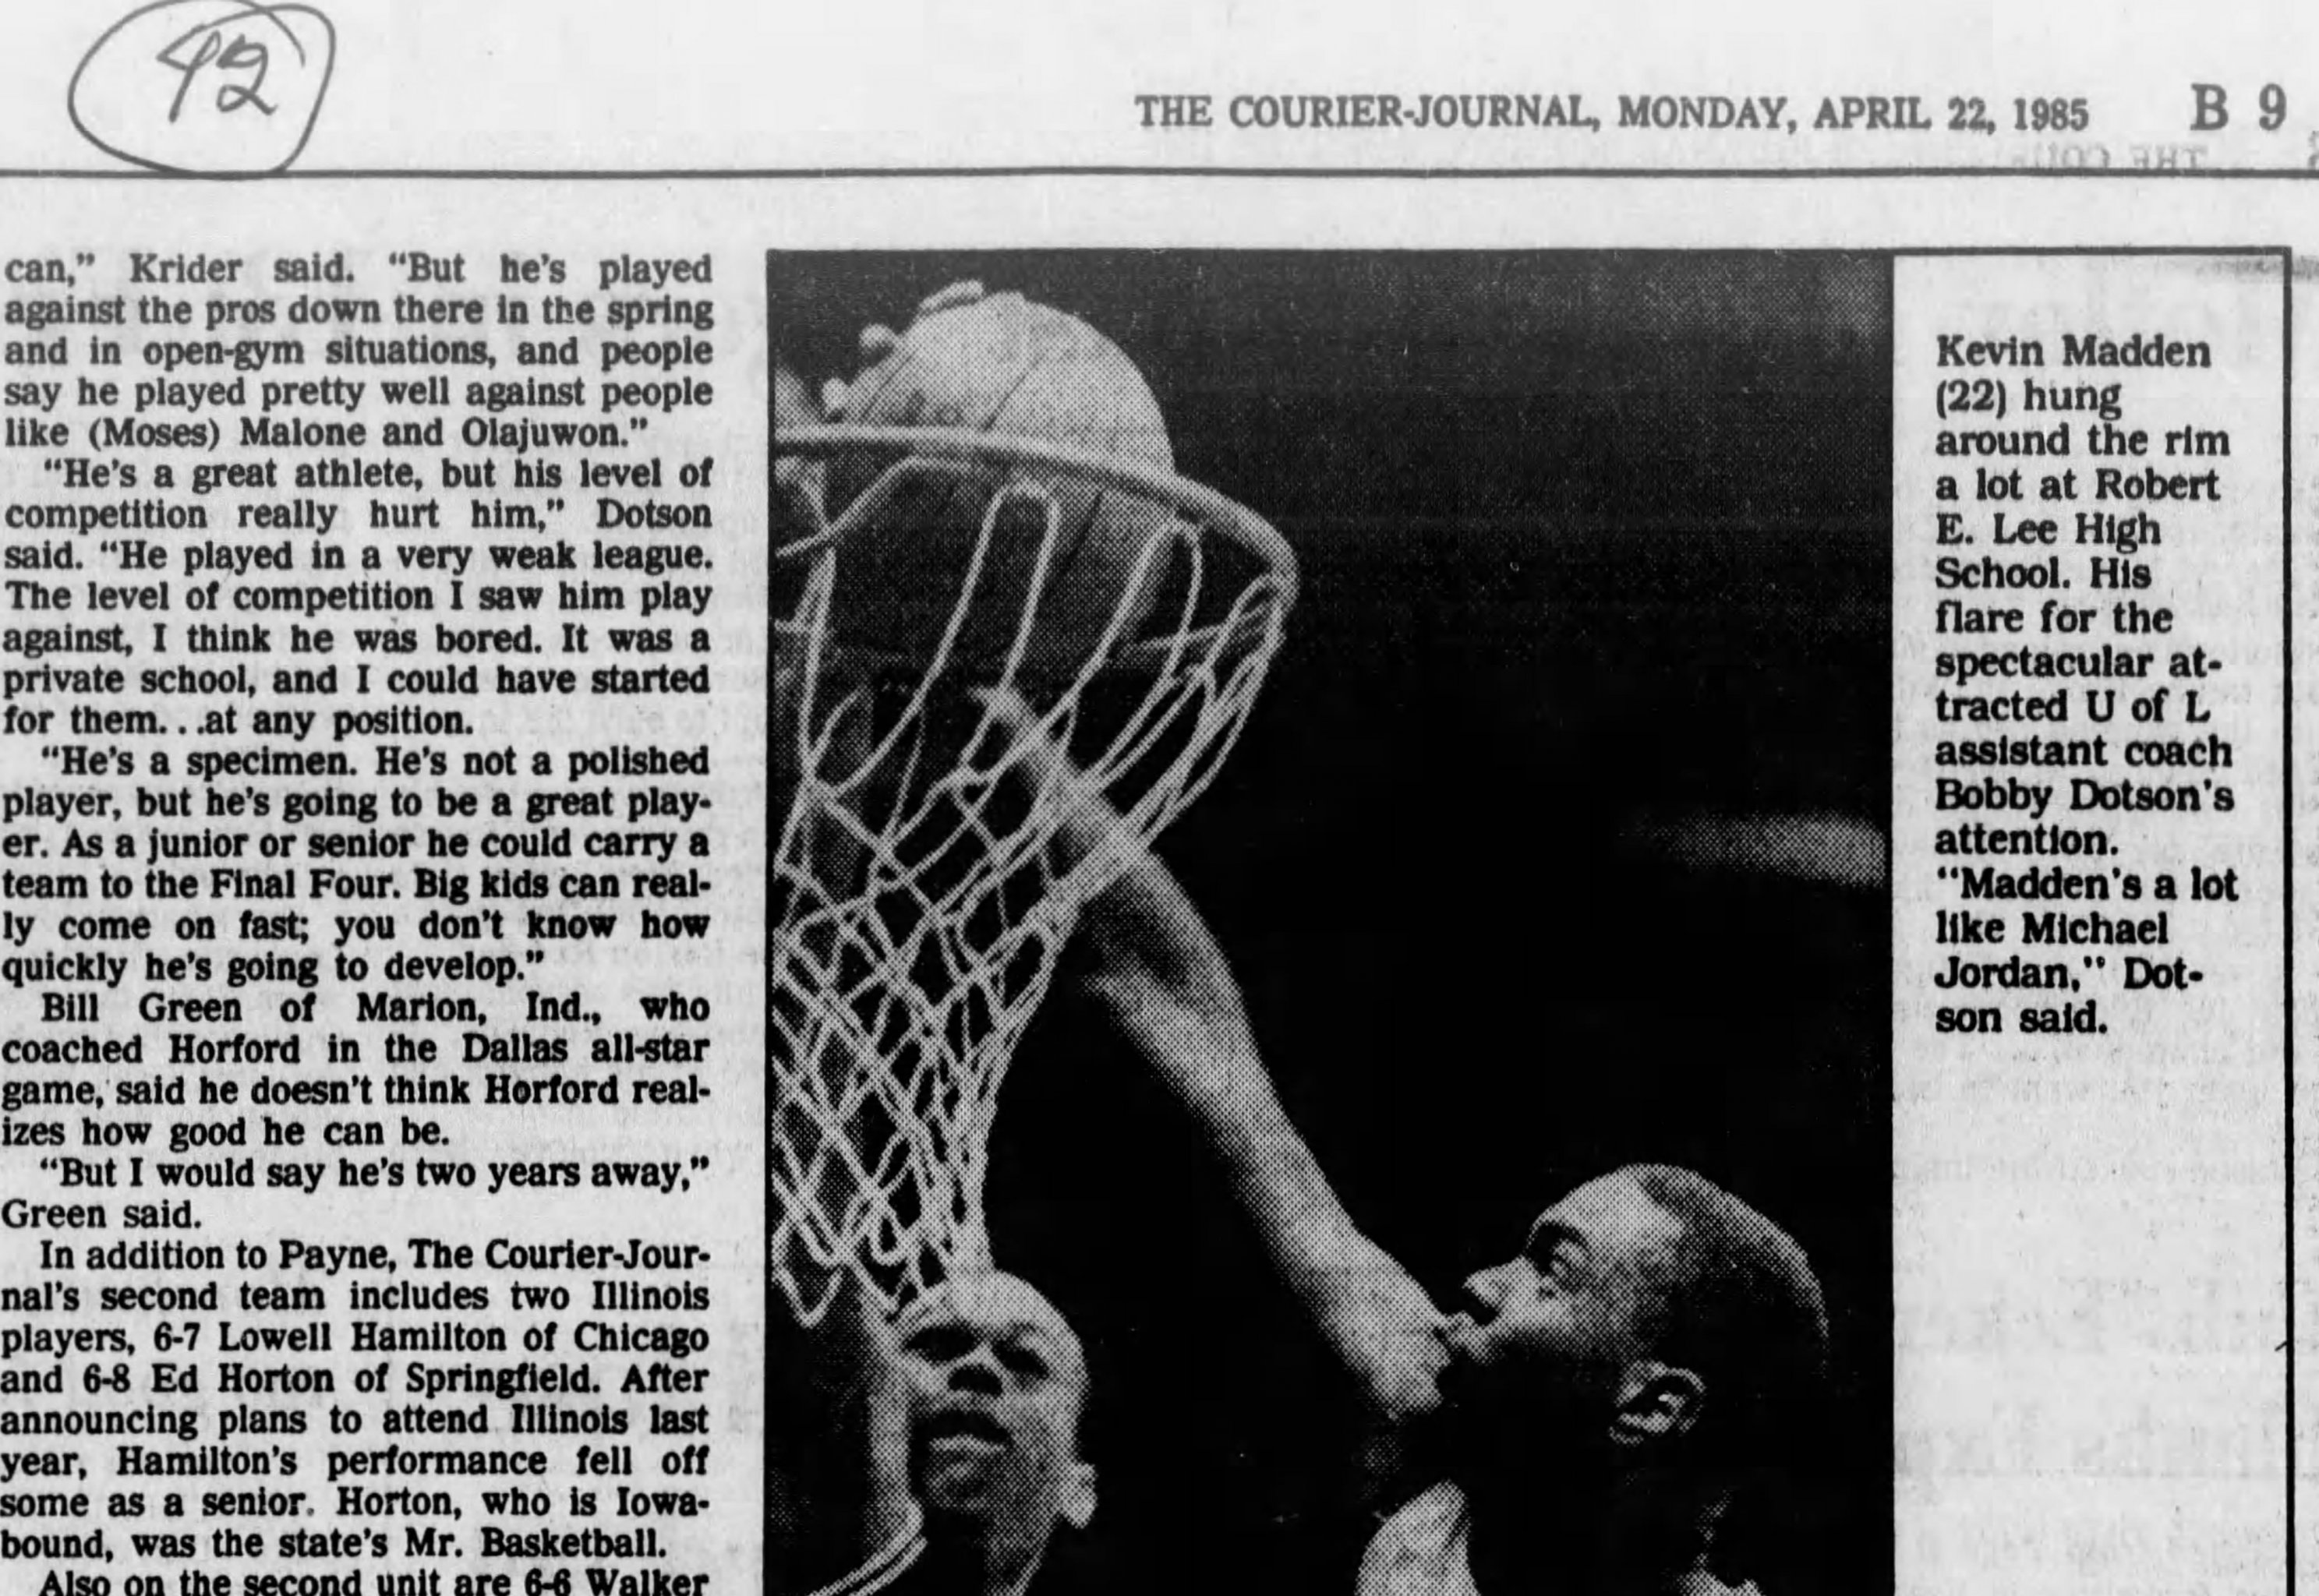 Remembering Maryland Basketball Star Len Bias, News, Scores, Highlights,  Stats, and Rumors